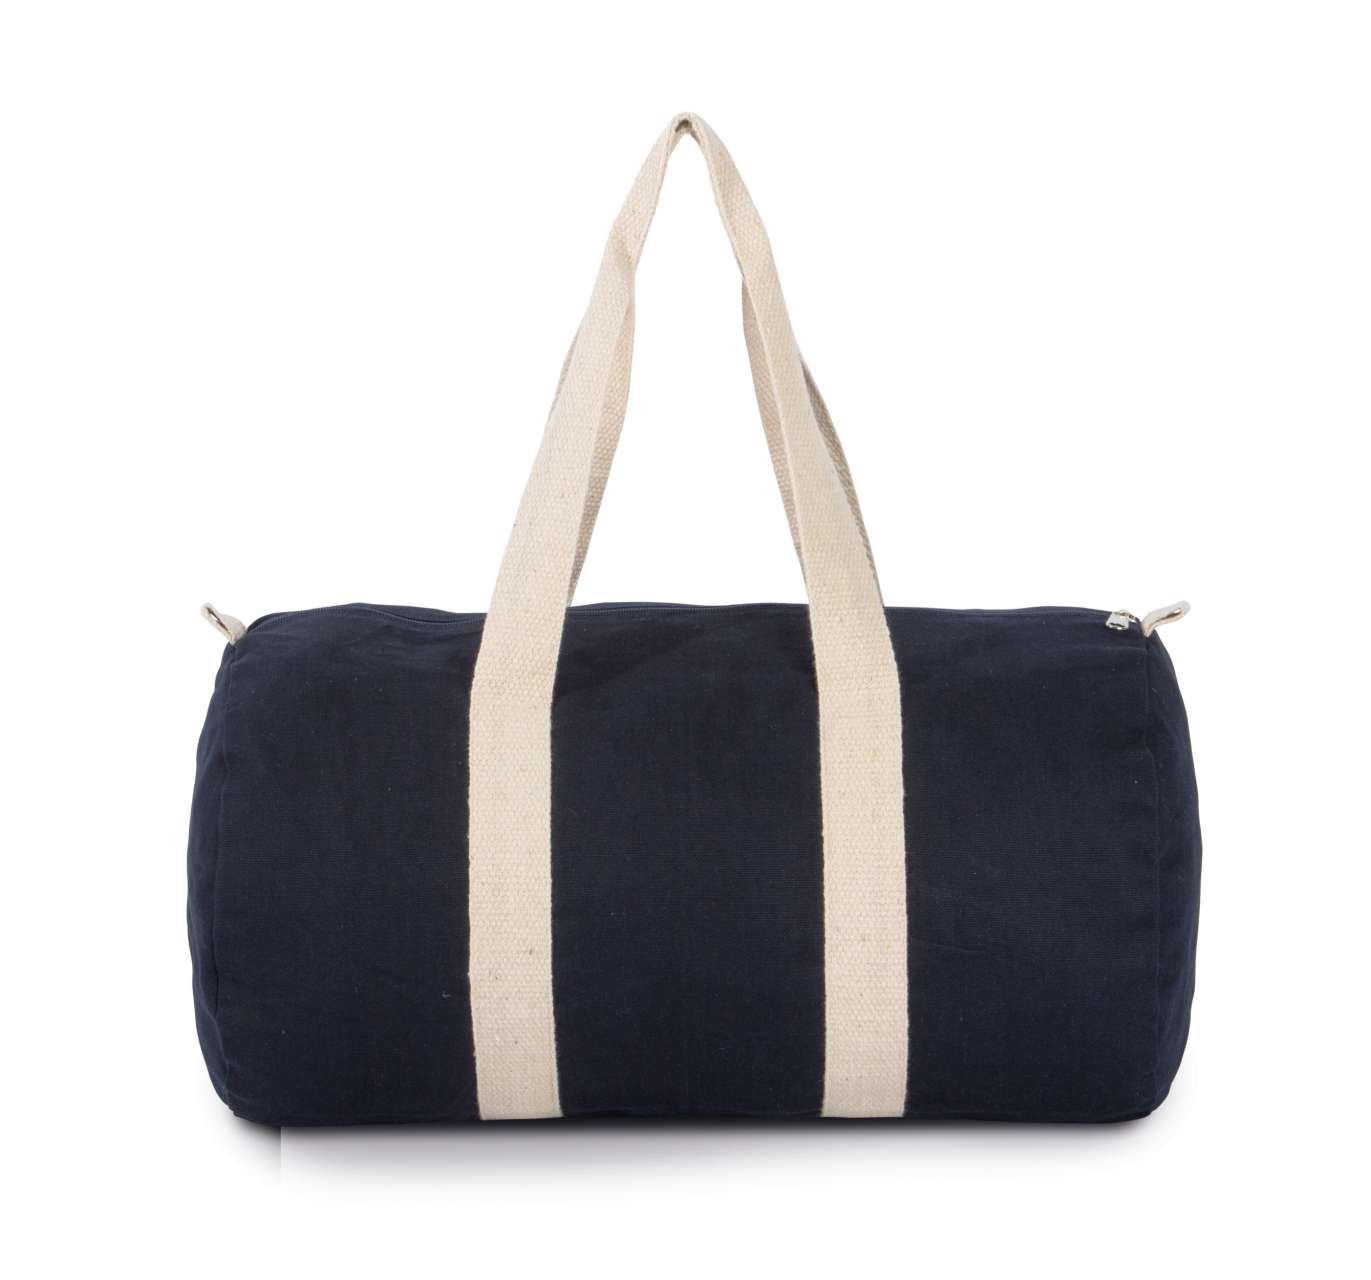 Promo  COTTON CANVAS HOLD-ALL BAG